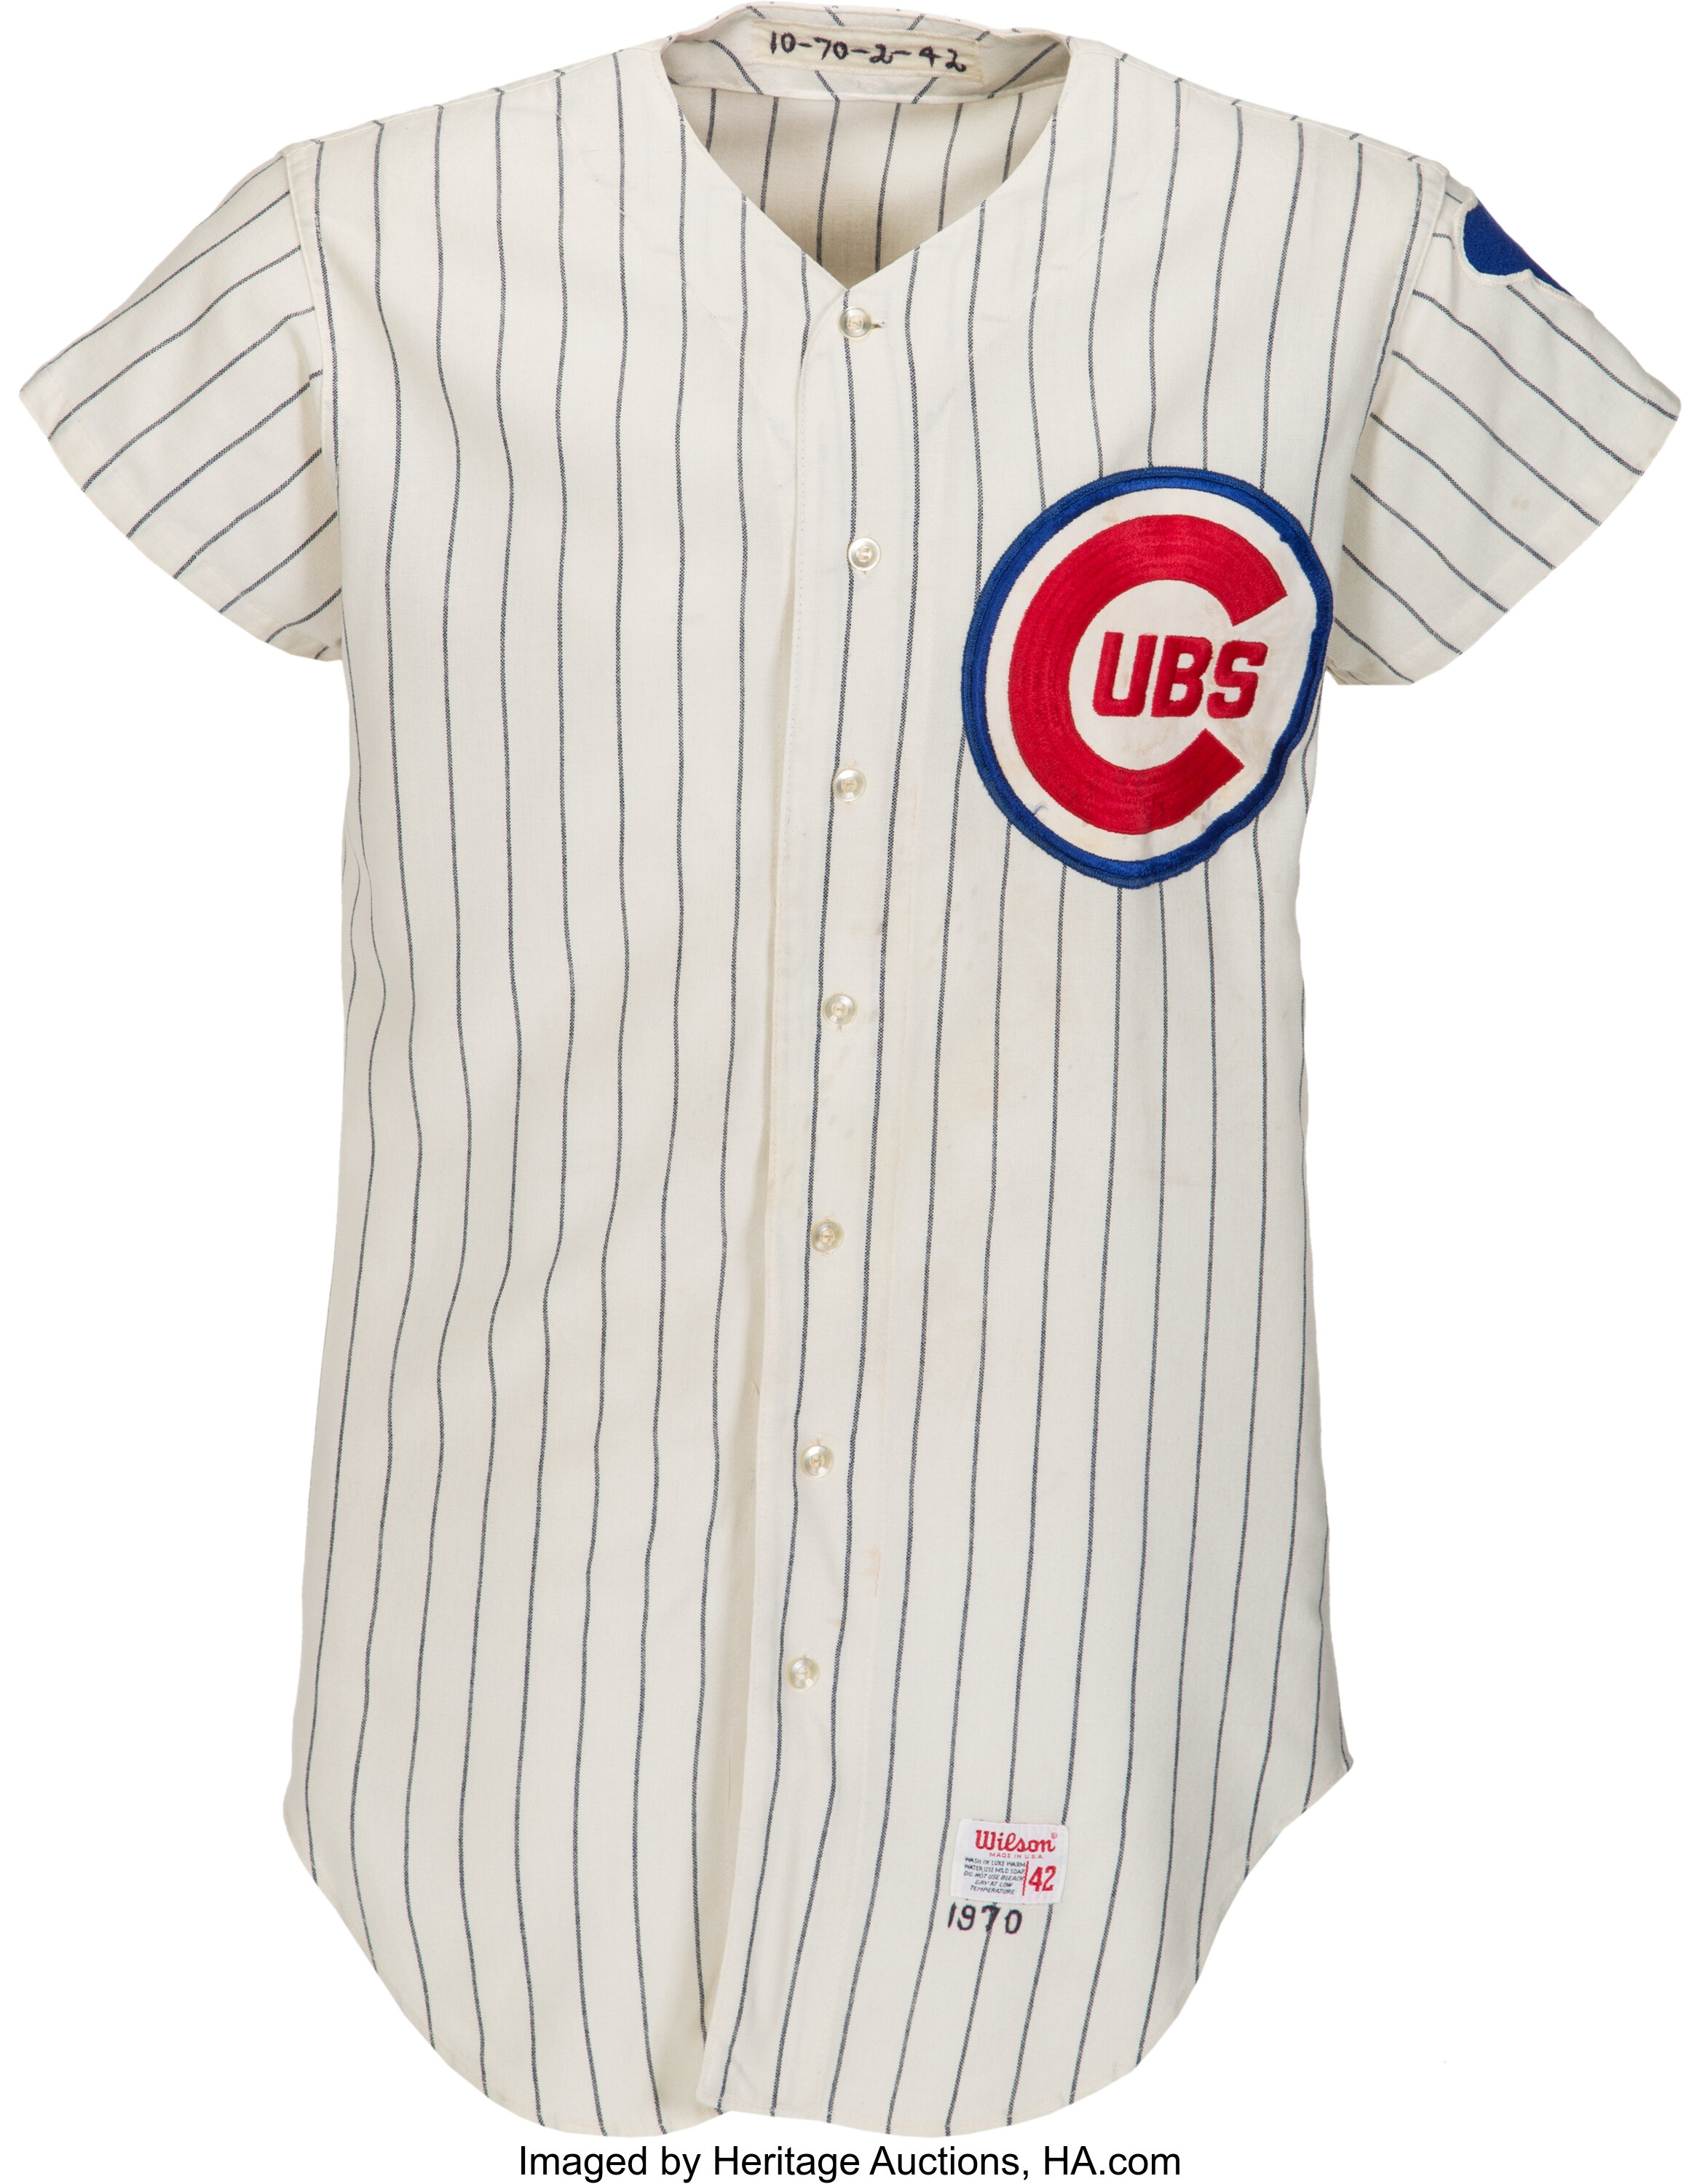 1970 Ron Santo Game Worn Chicago Cubs Jersey. Baseball, Lot #80018